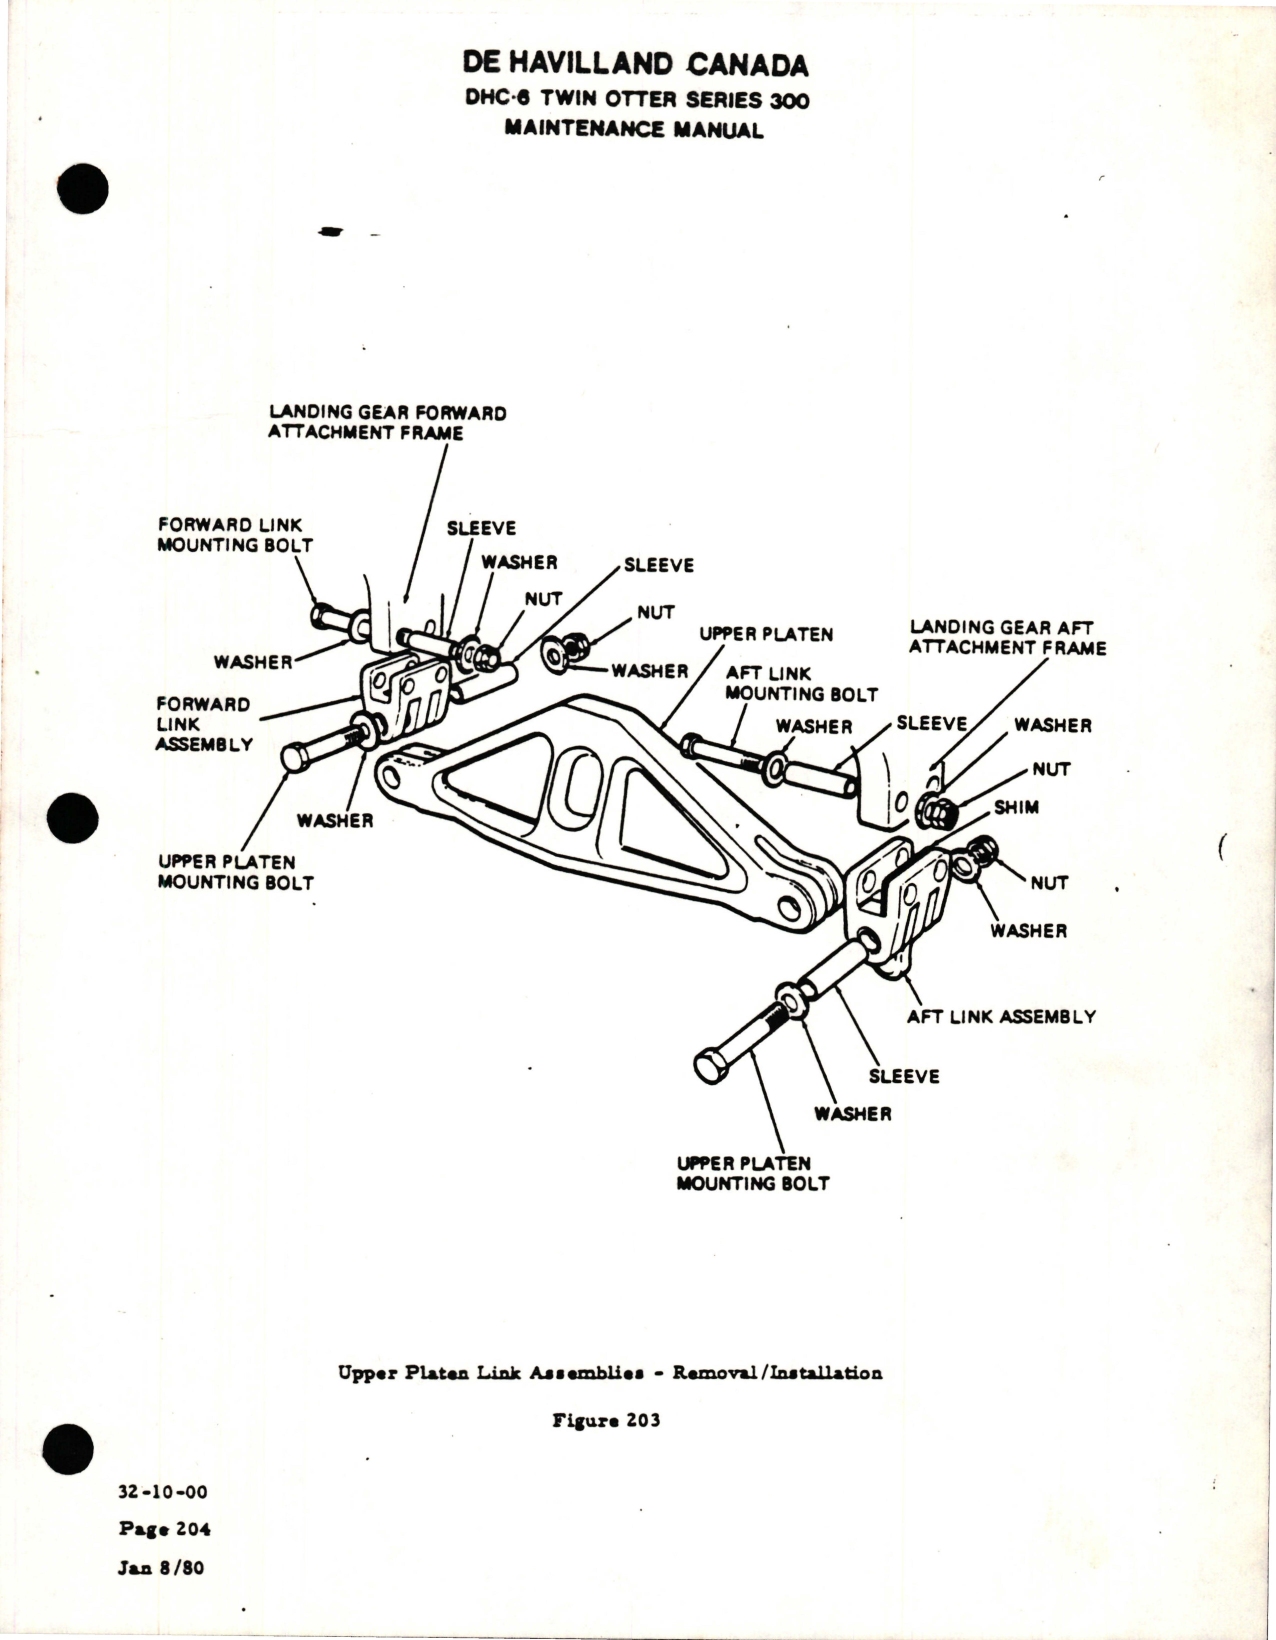 Sample page 7 from AirCorps Library document: Overhaul Manual for Main Landing Gear Leg Assembly for DHC-6 Twin Otter - Part C6U1103